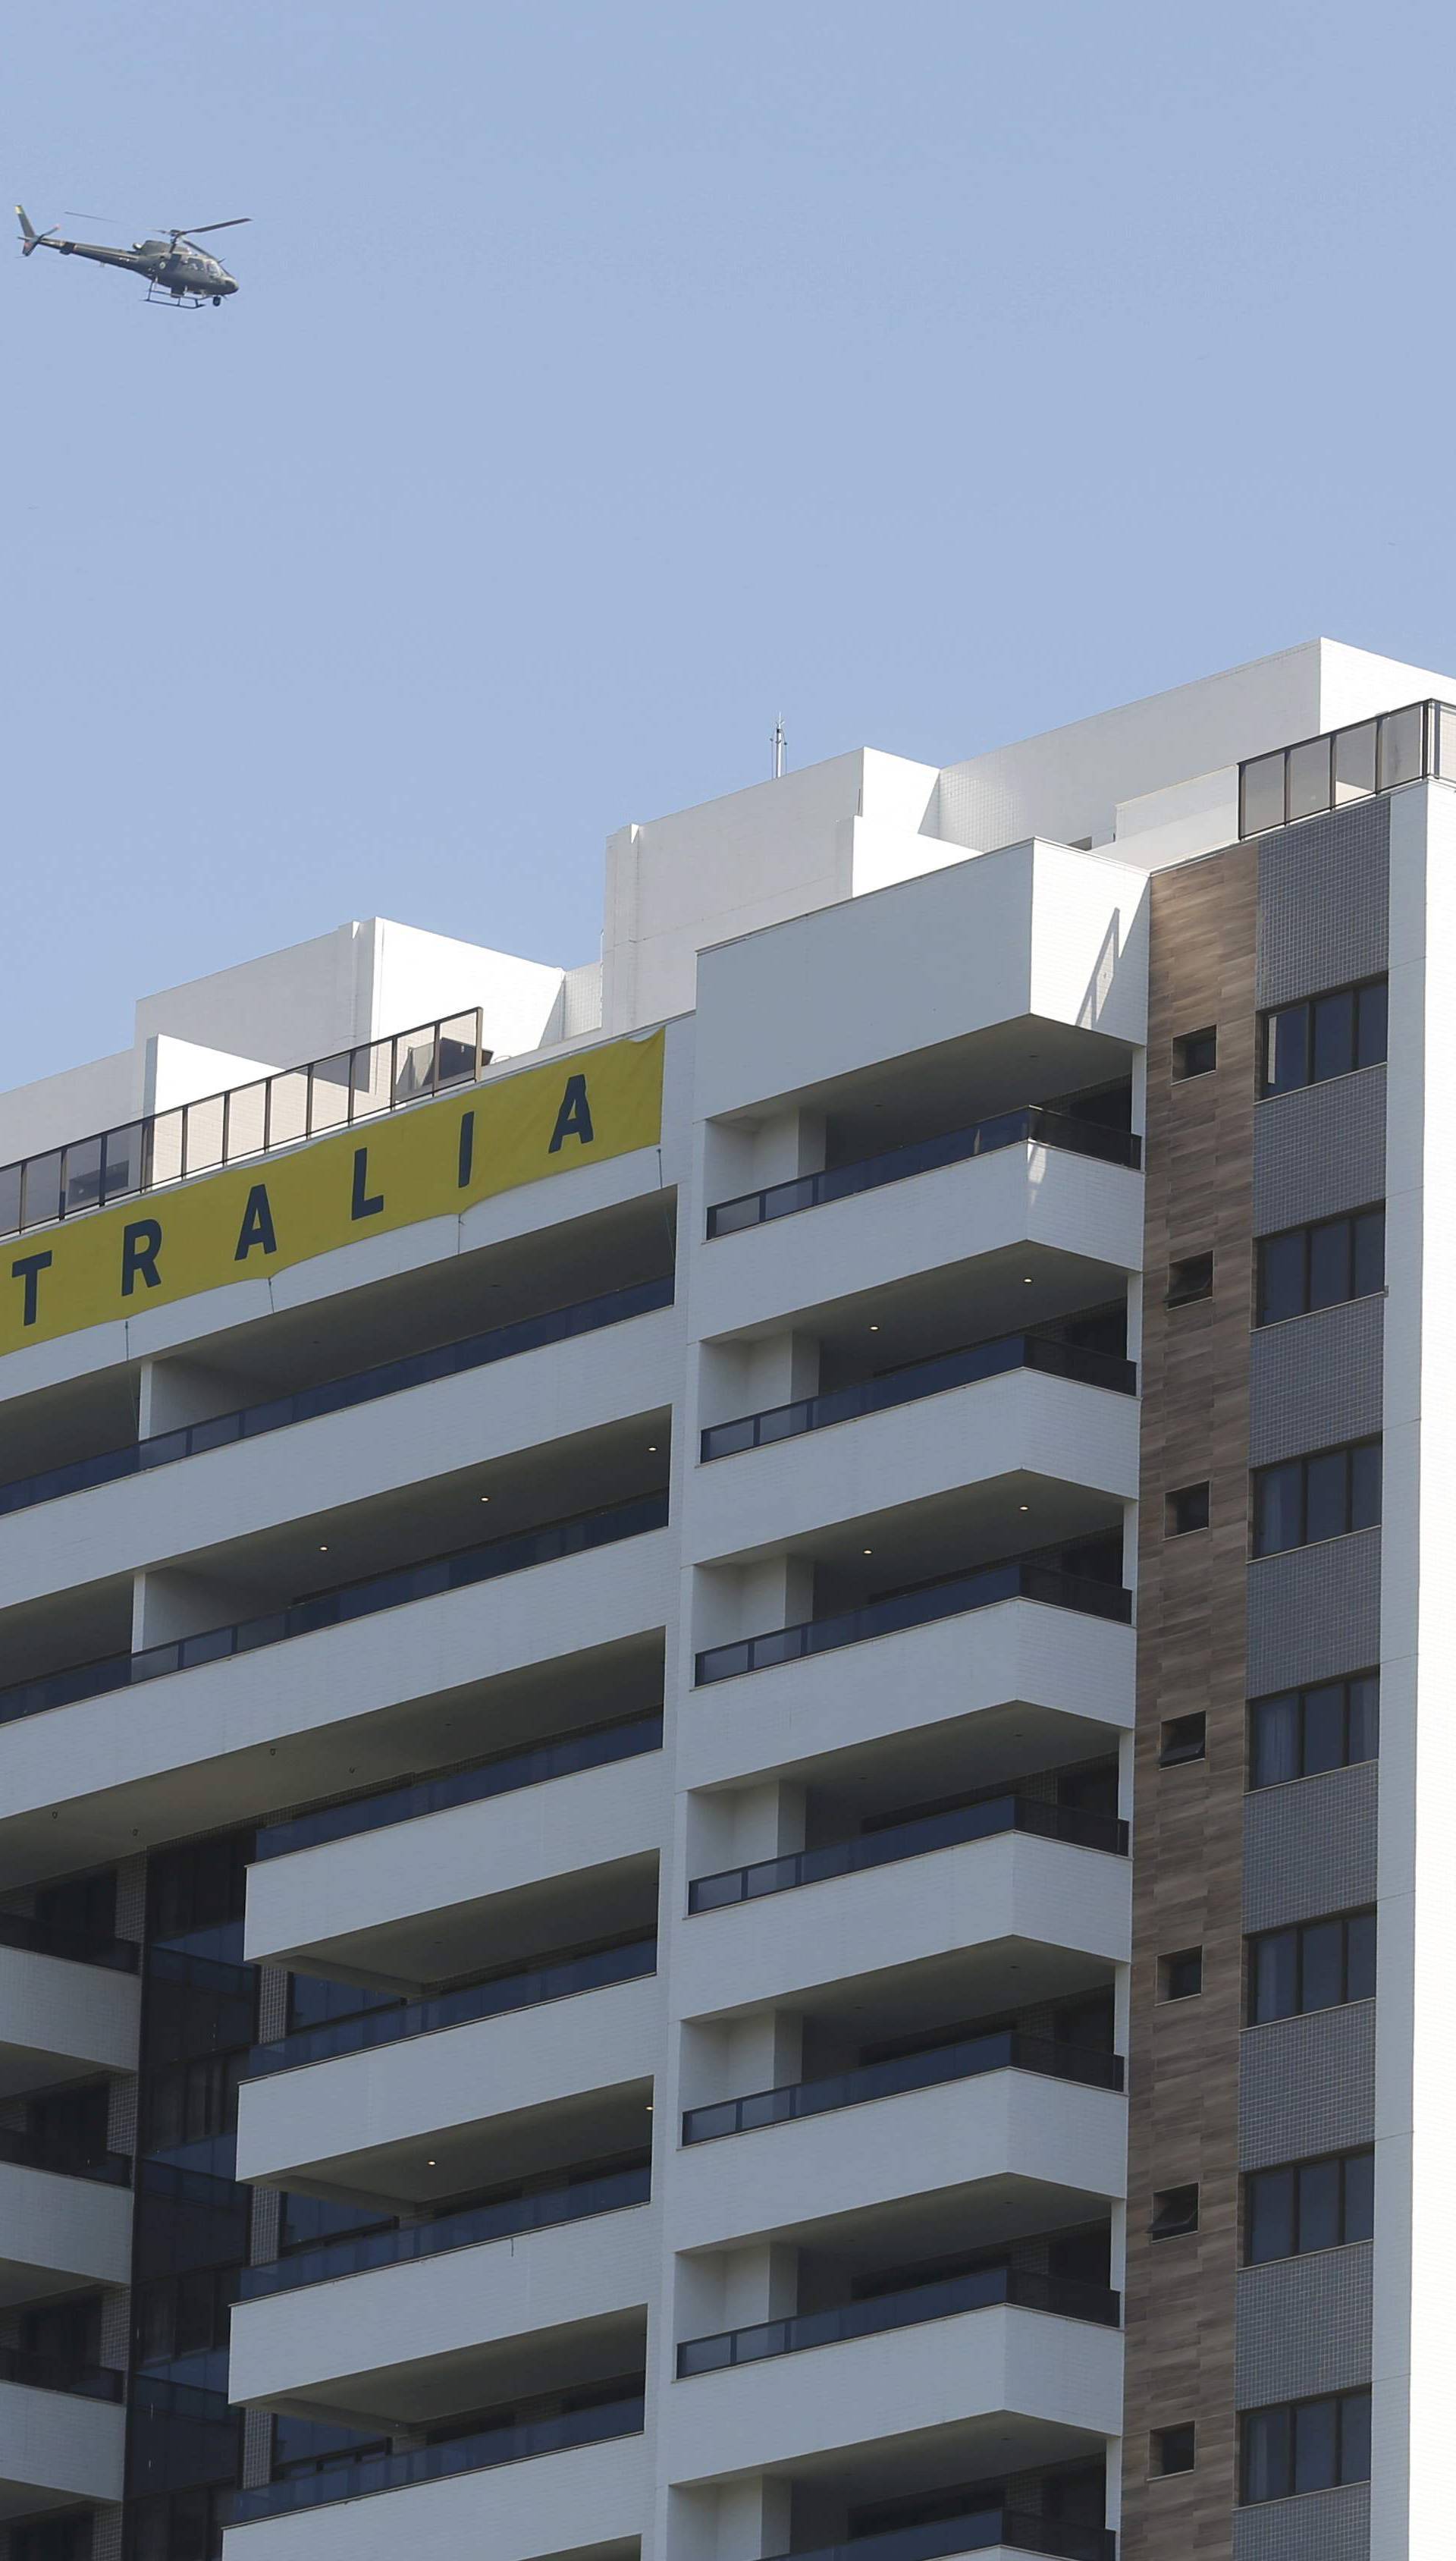 A view of one of the blocks of apartments where Australian athletes are supposed to stay in Rio de Janeiro